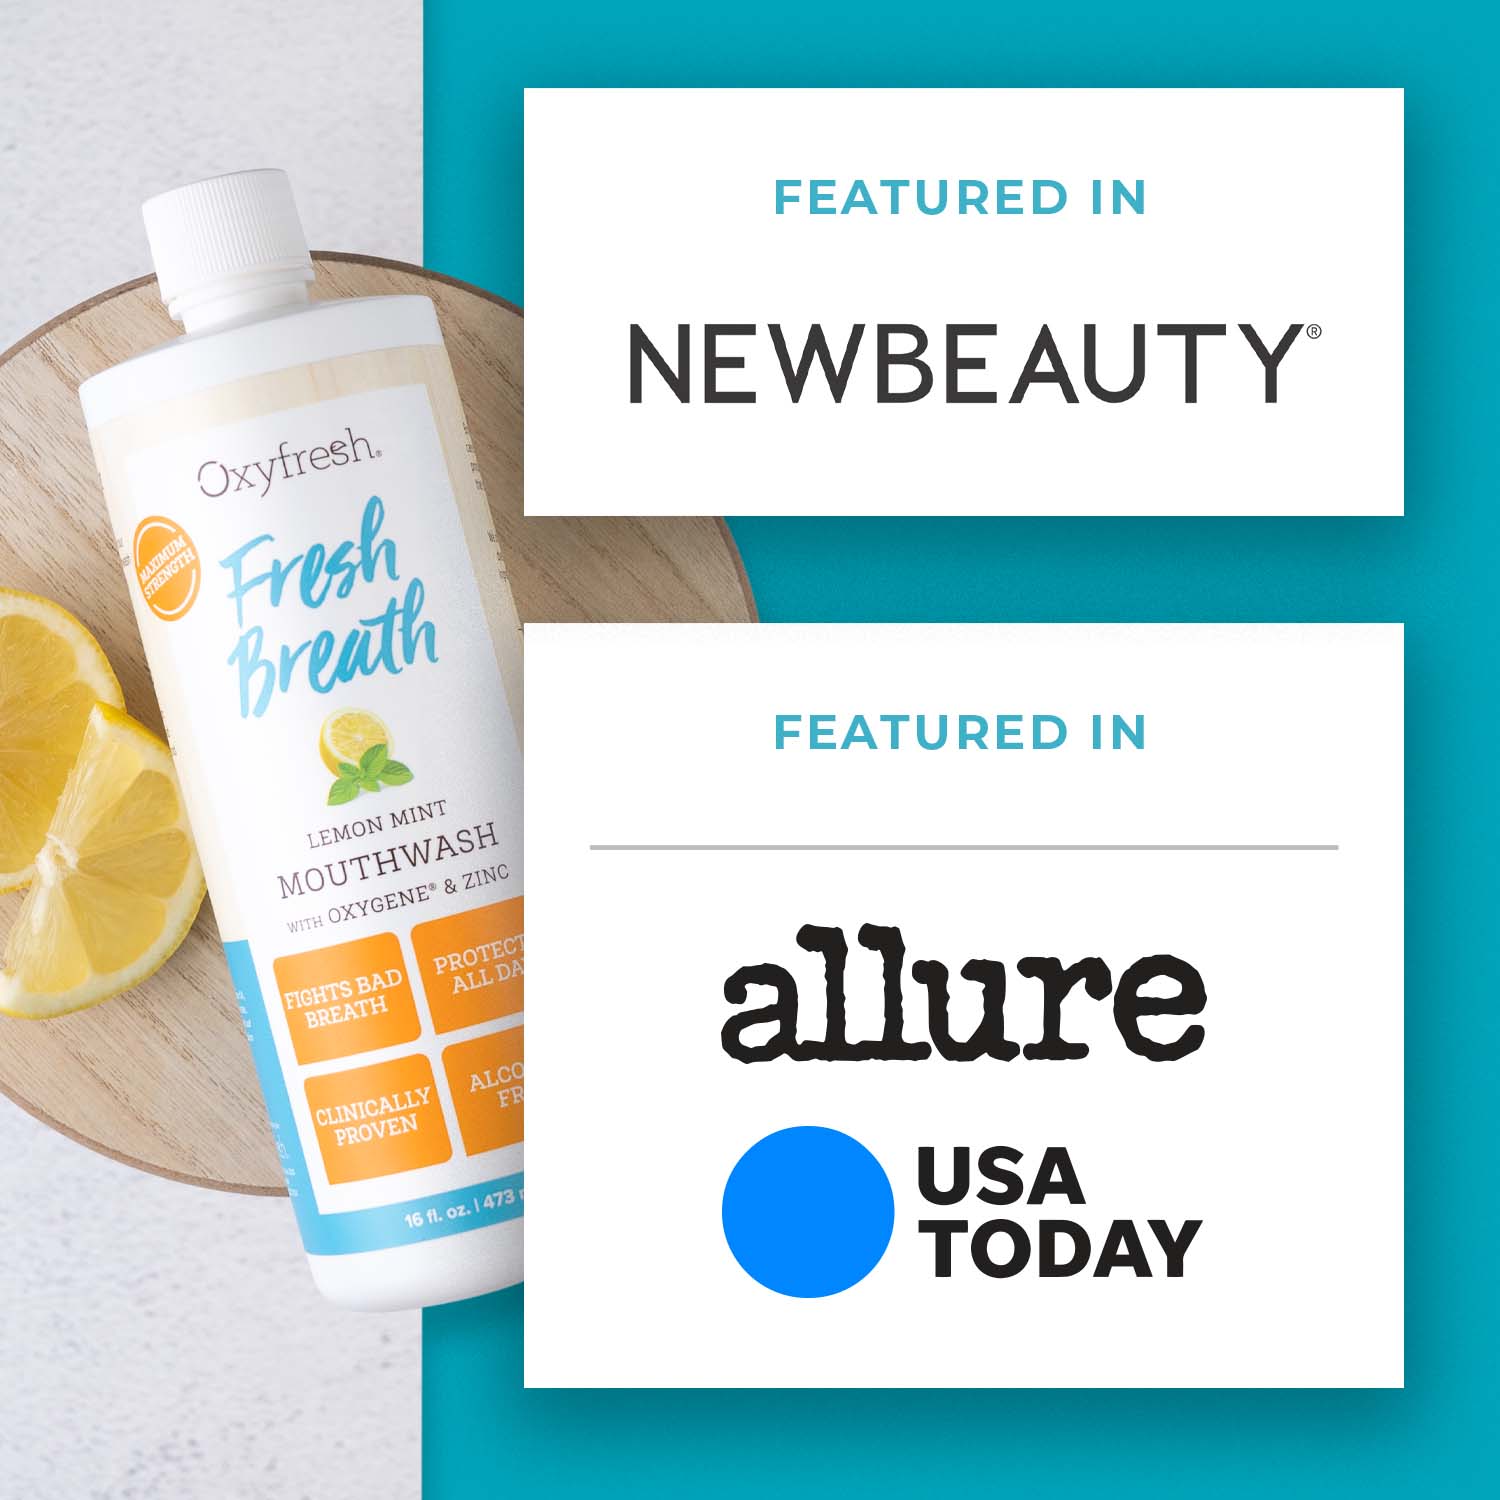 oxyfresh lemon mint mouthwash featured in newbeauty allure and usa today